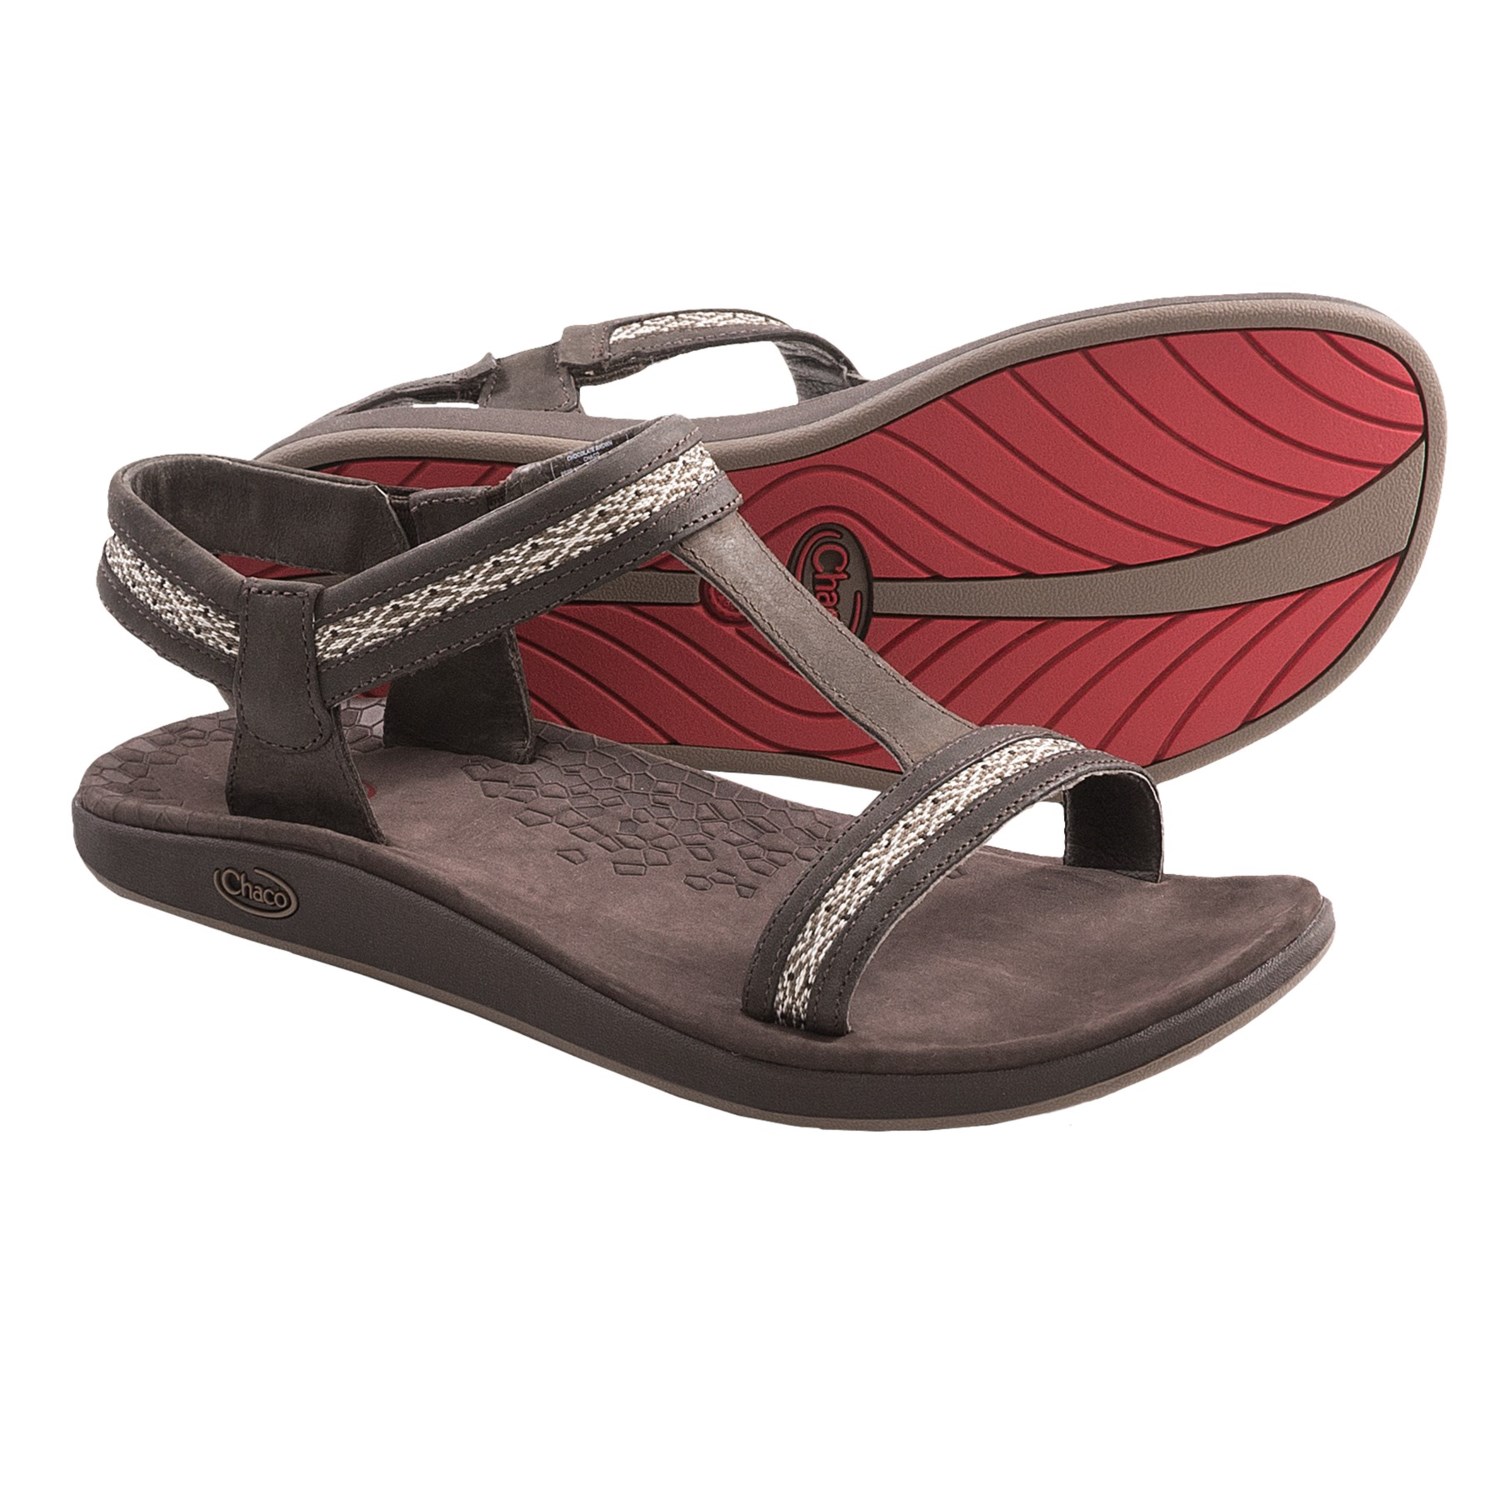 Chaco Junction Sandals - Leather (For Women) in Chocolate Brown